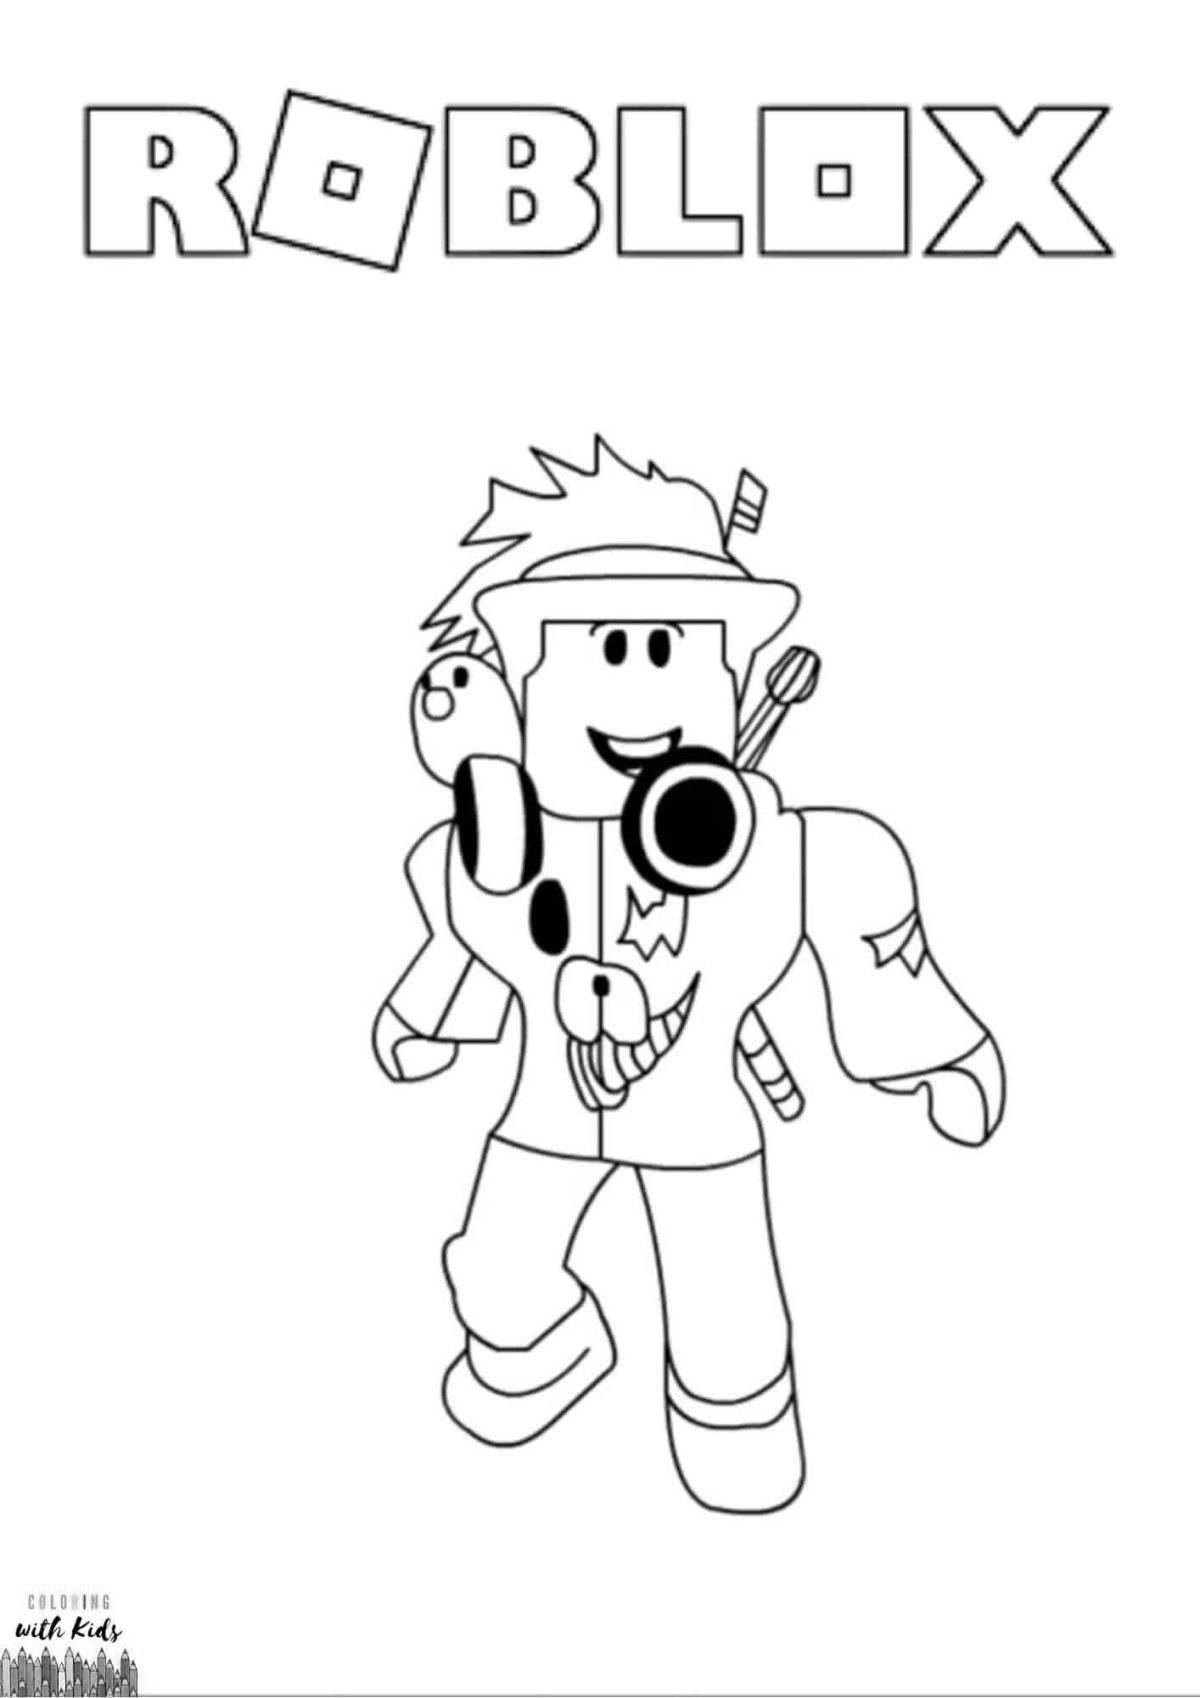 Joyful roblox player coloring page